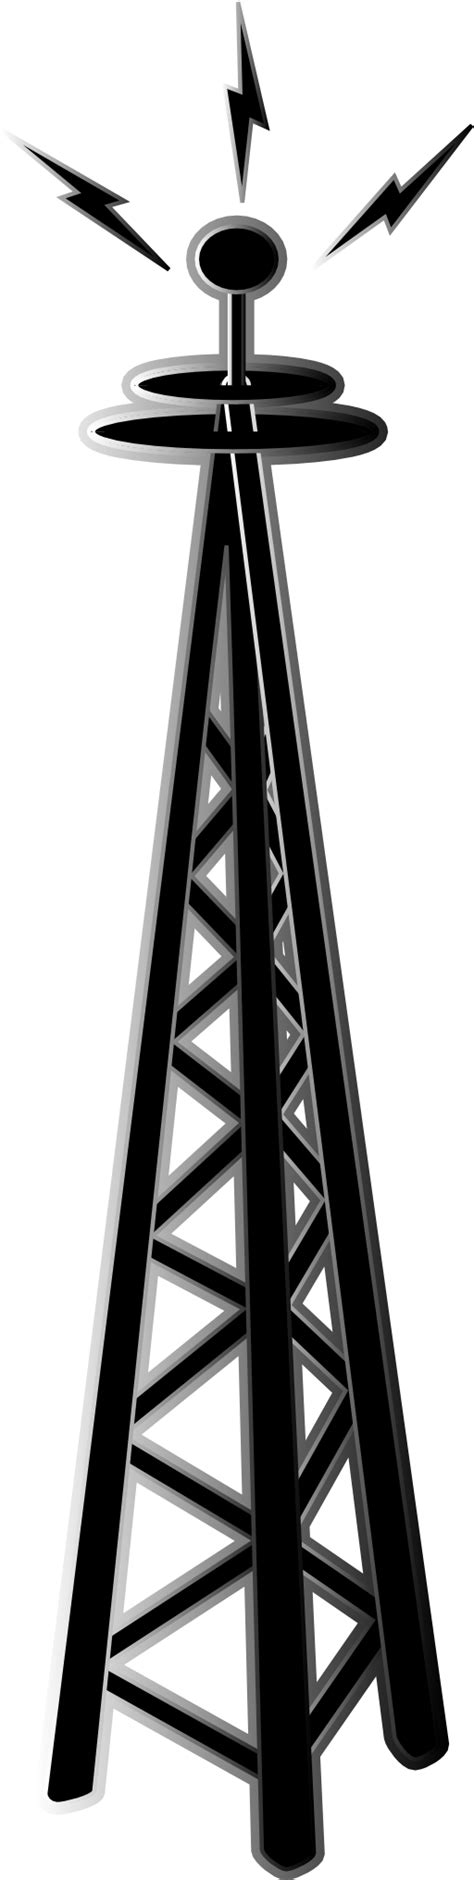 Electric clipart electric tower, Electric electric tower Transparent FREE for download on ...